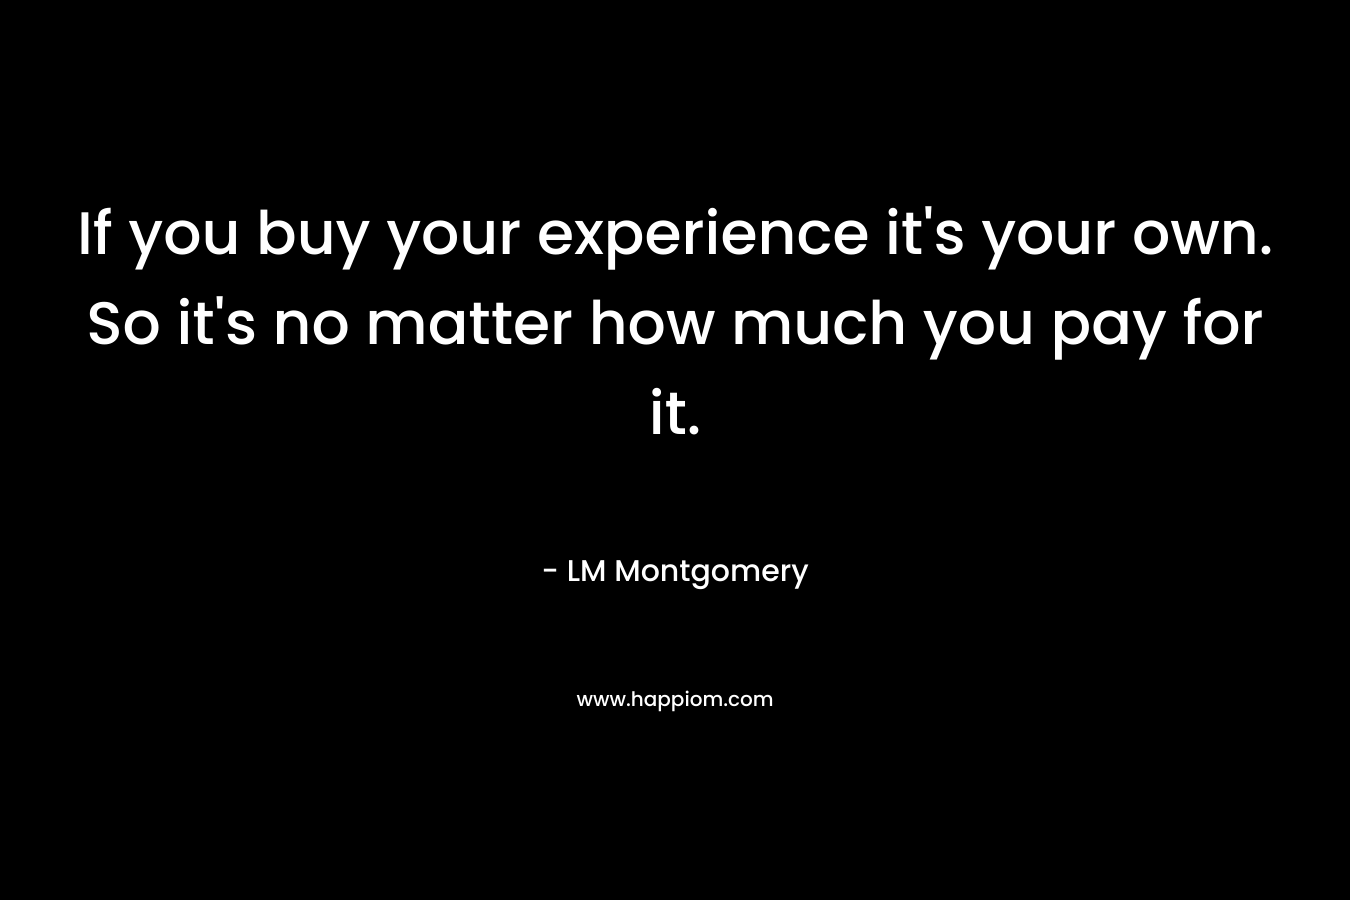 If you buy your experience it's your own. So it's no matter how much you pay for it.